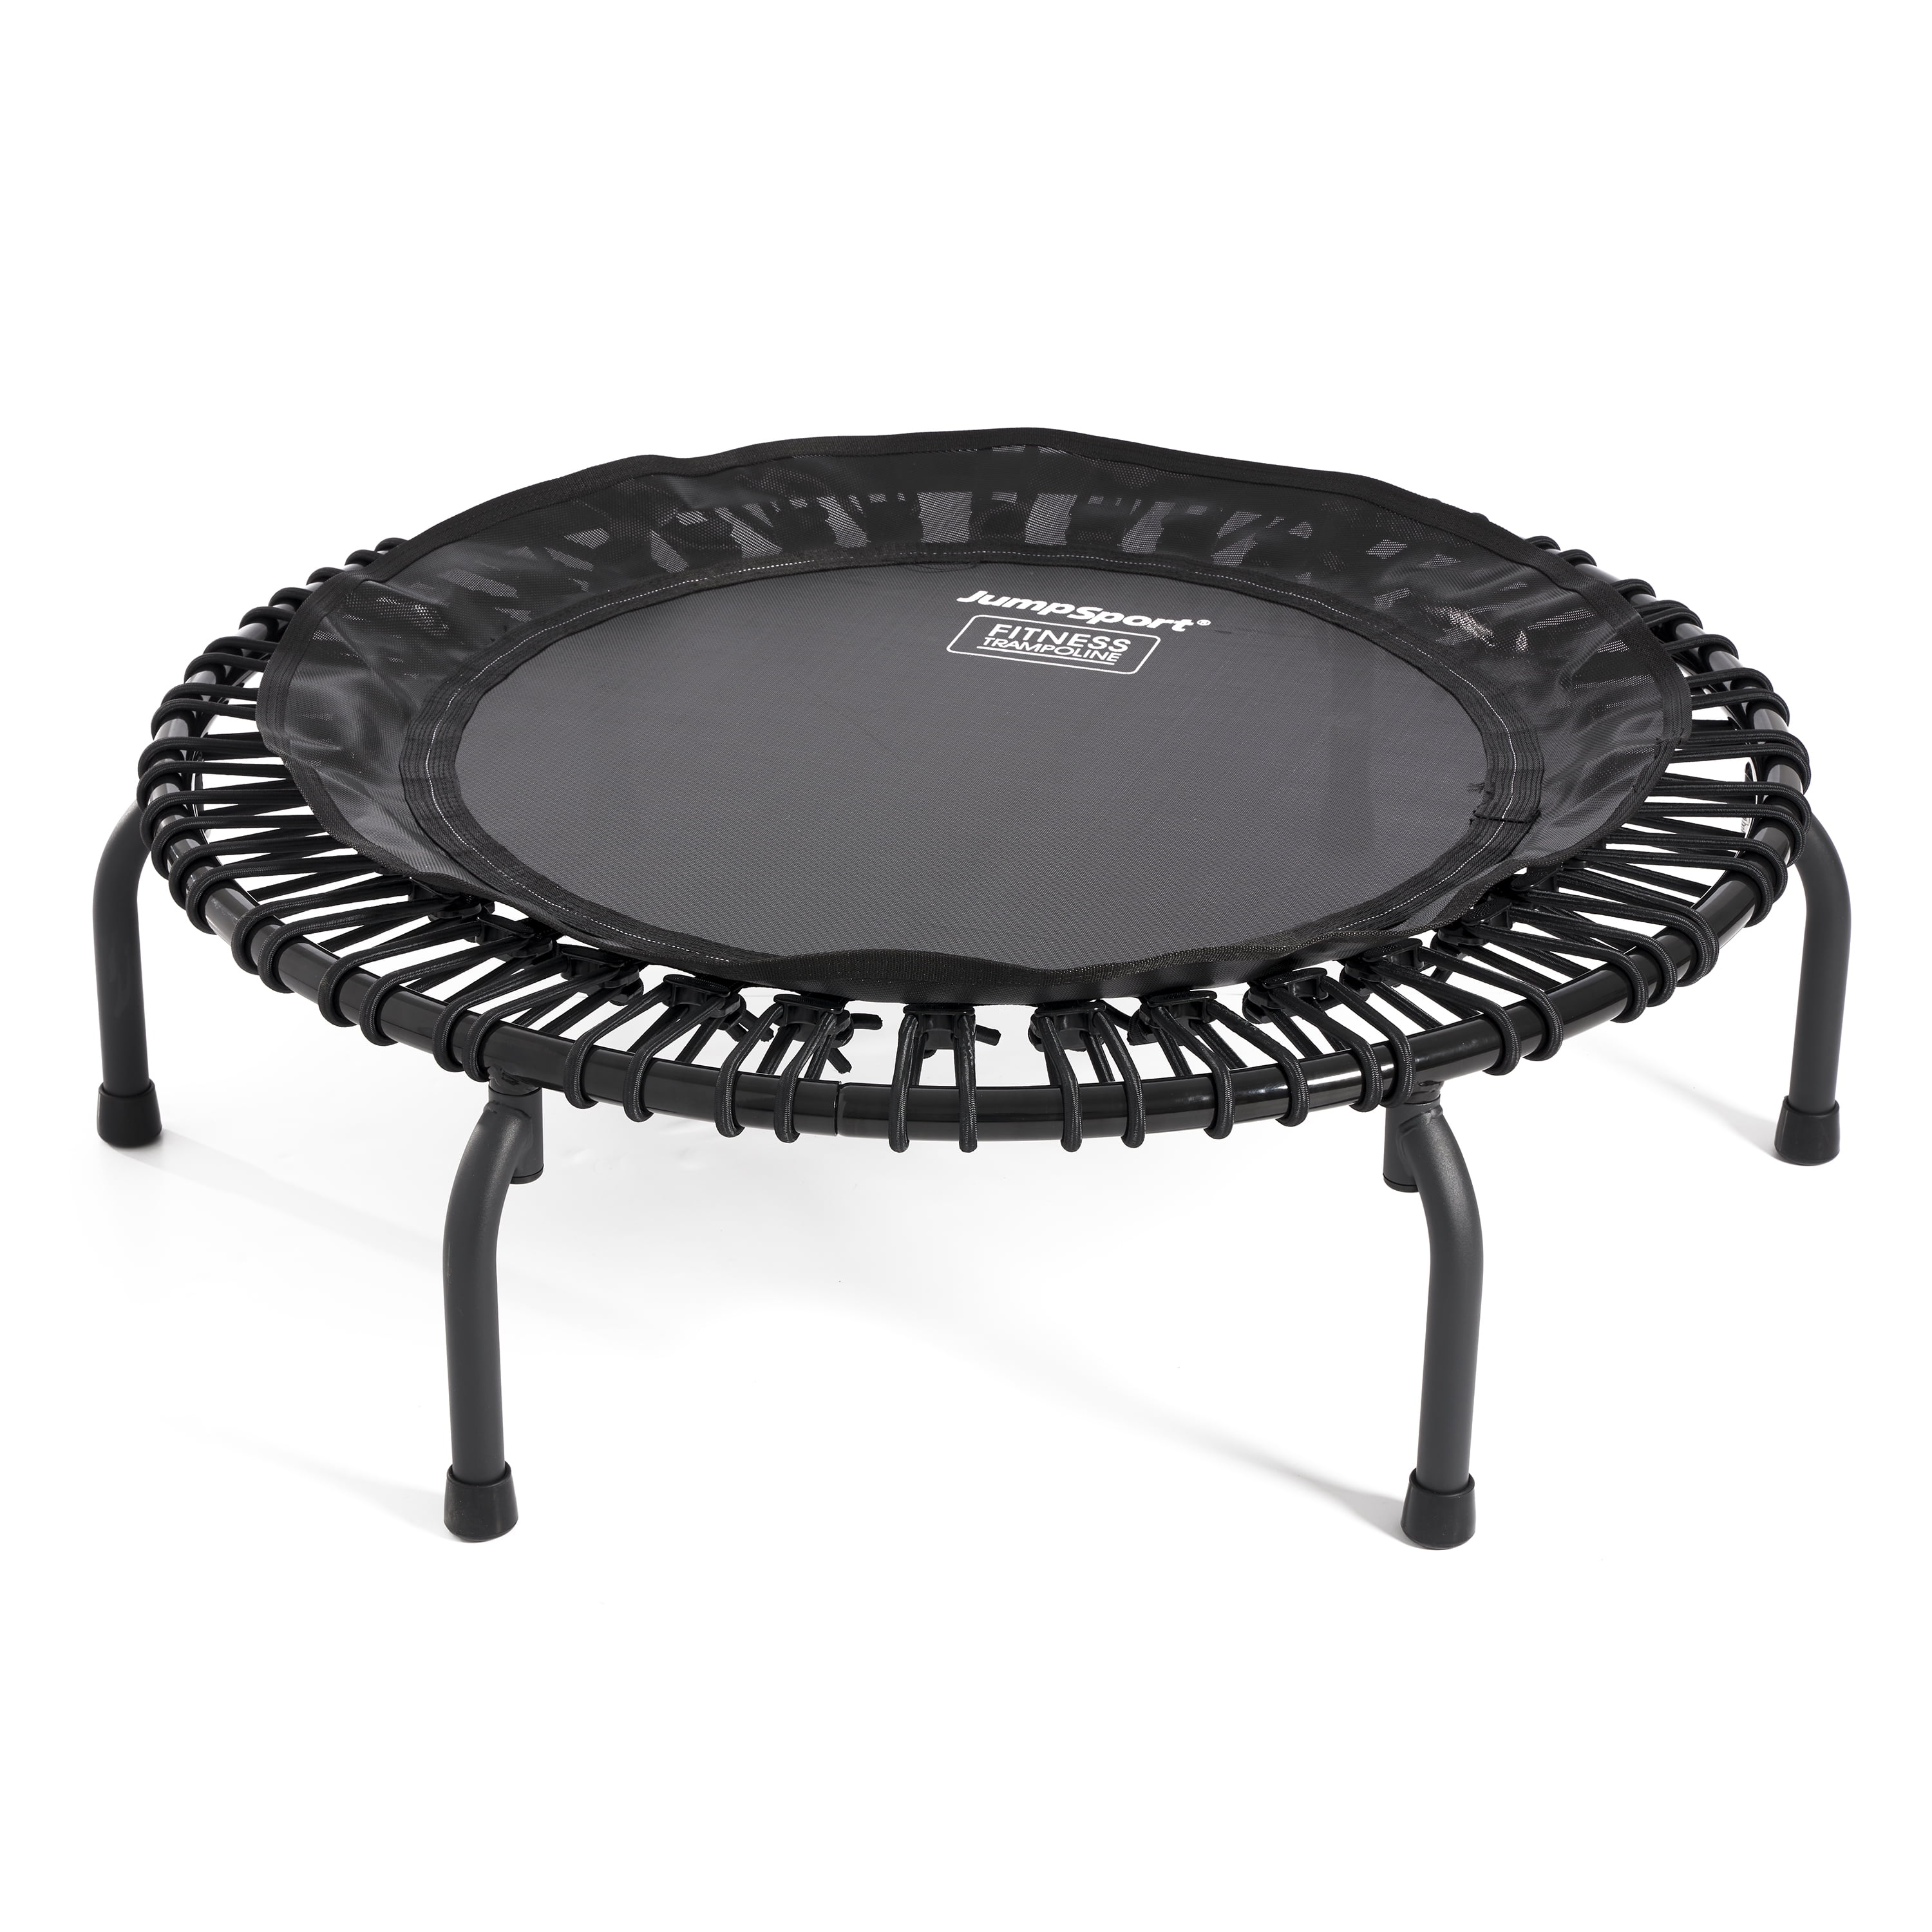 Details about   JumpSport 230F Folding Rebounder Trampoline for Cardio Fitness For Parts 